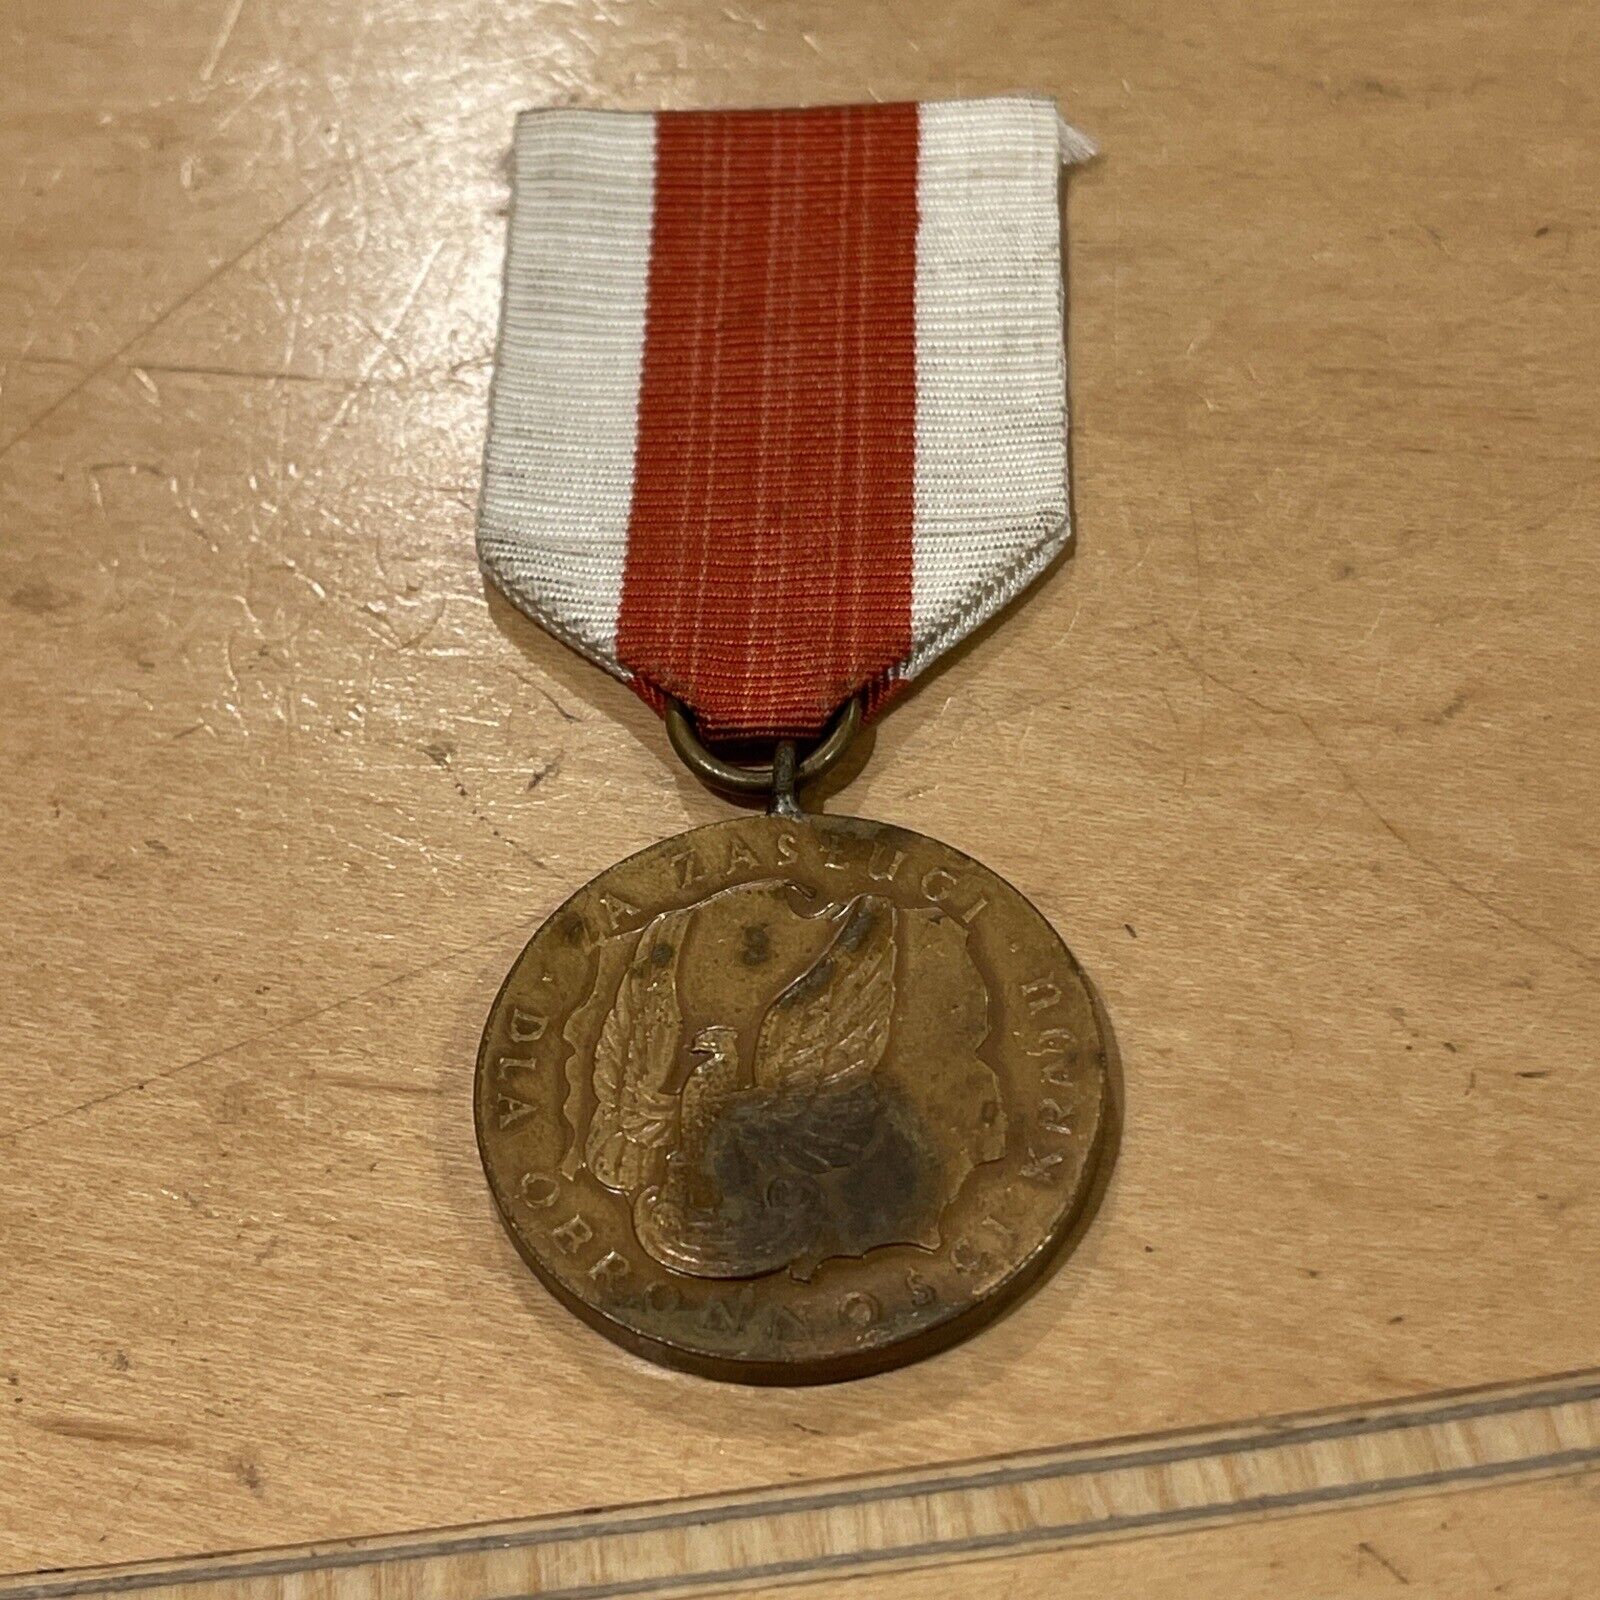 POLAND.MEDAL OF MERIT FOR NATIONAL DEFENCE,3rd CLASS,BRONZE,38mm. EST. 1966.